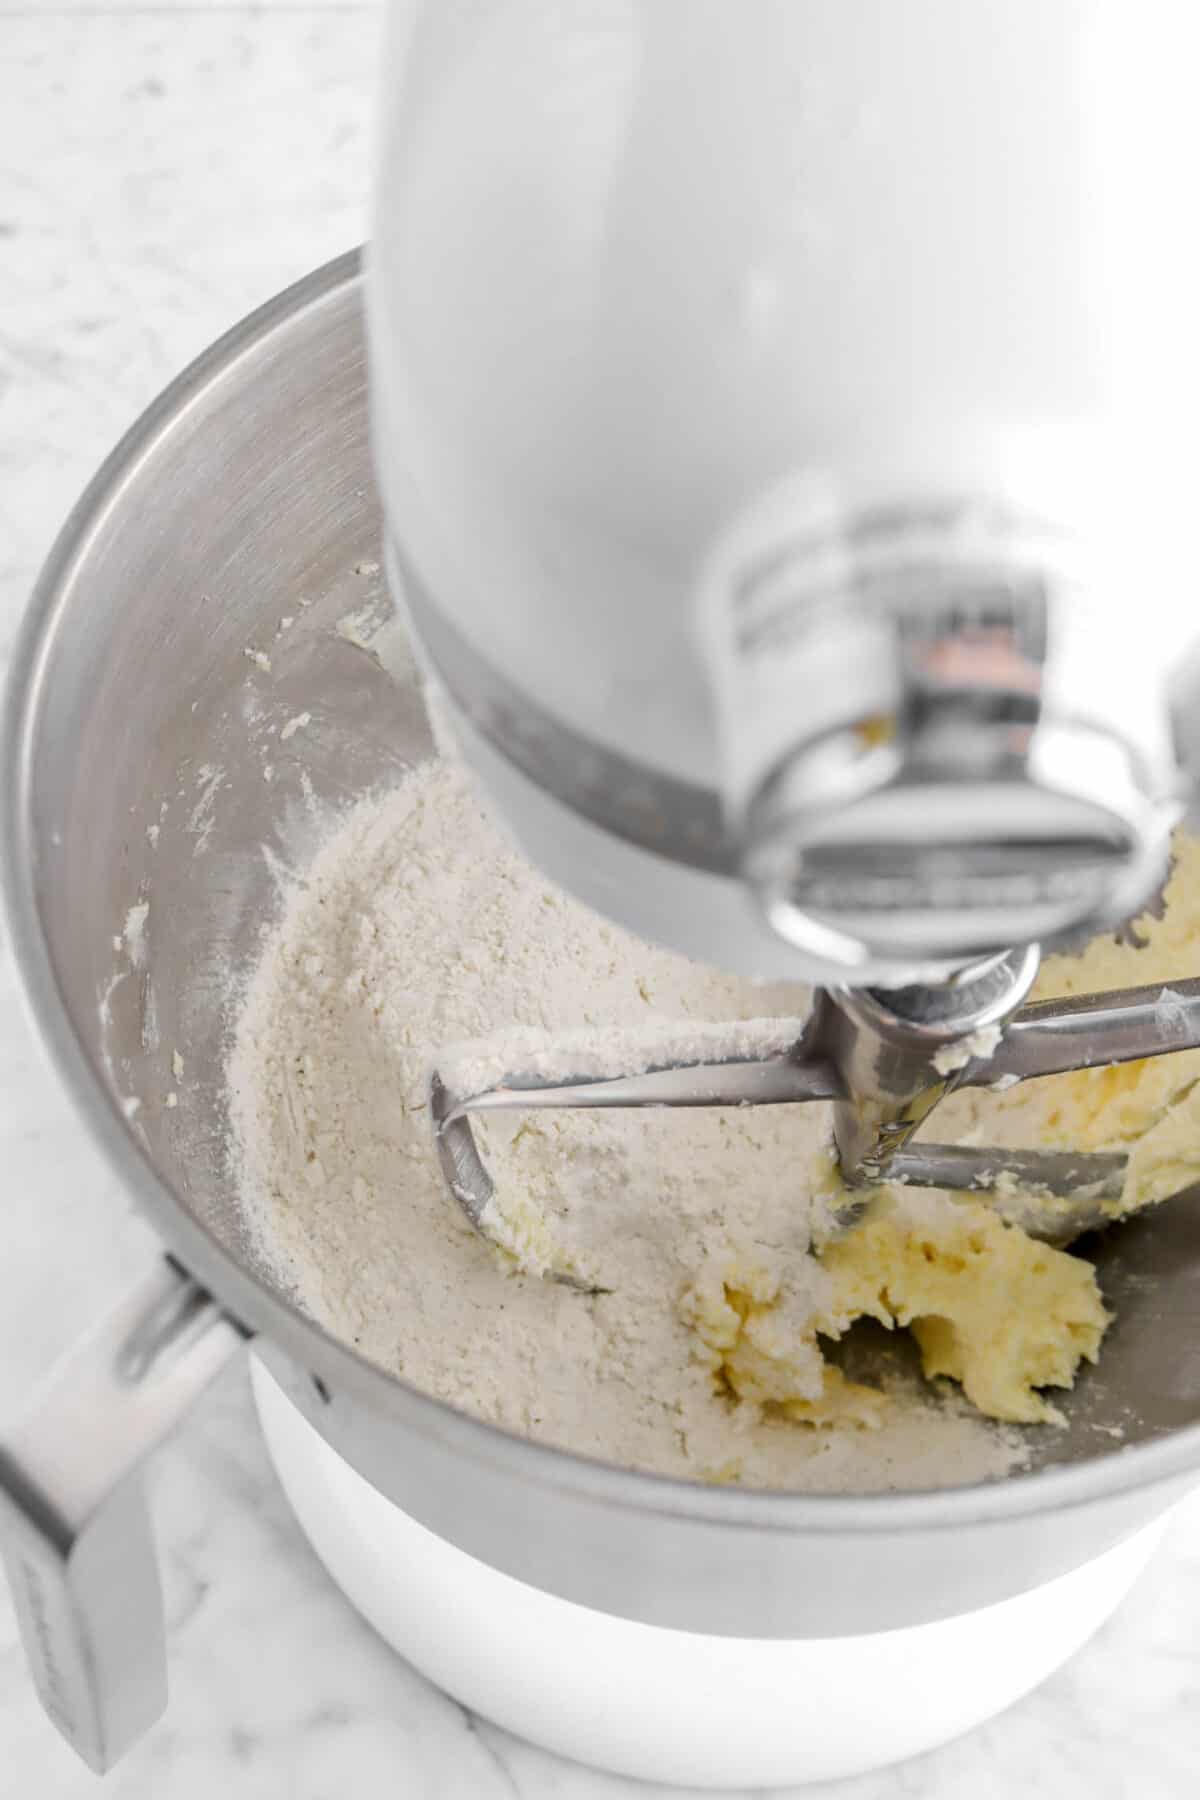 dry ingredients added to butter mixture